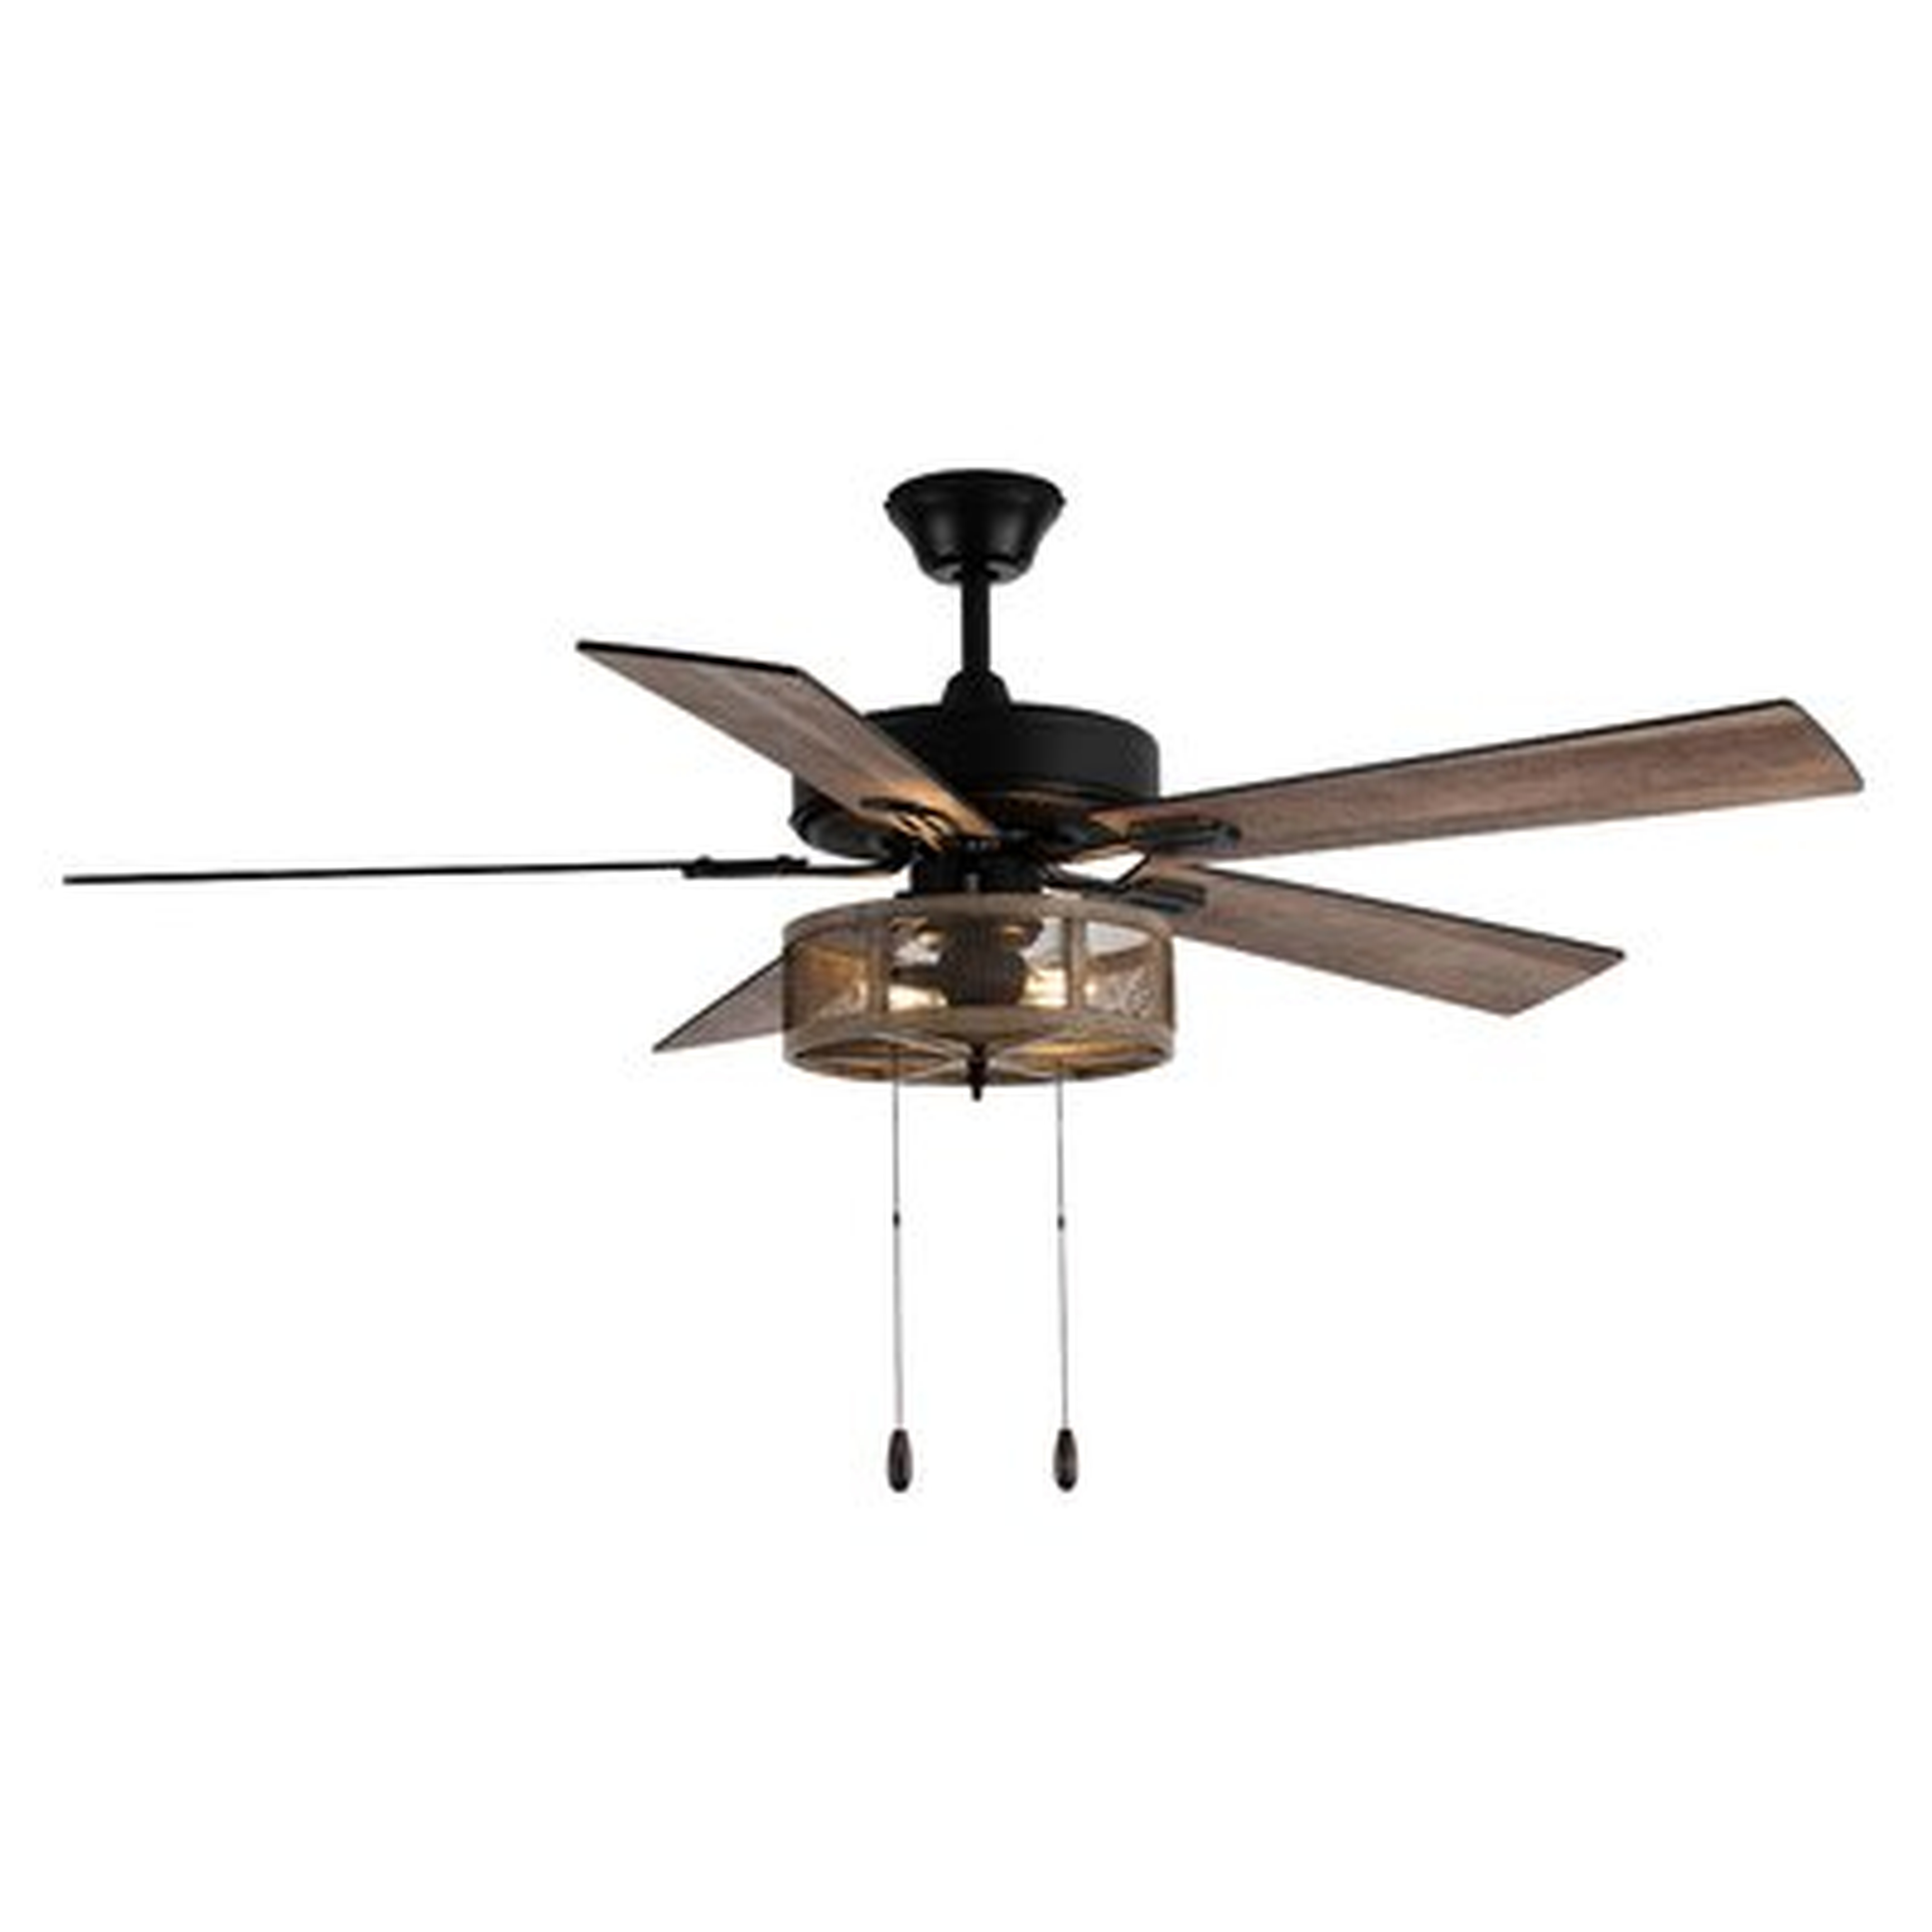 52" Easterling 5 - Blade Caged Ceiling Fan with Pull Chain and Light Kit Included - Wayfair